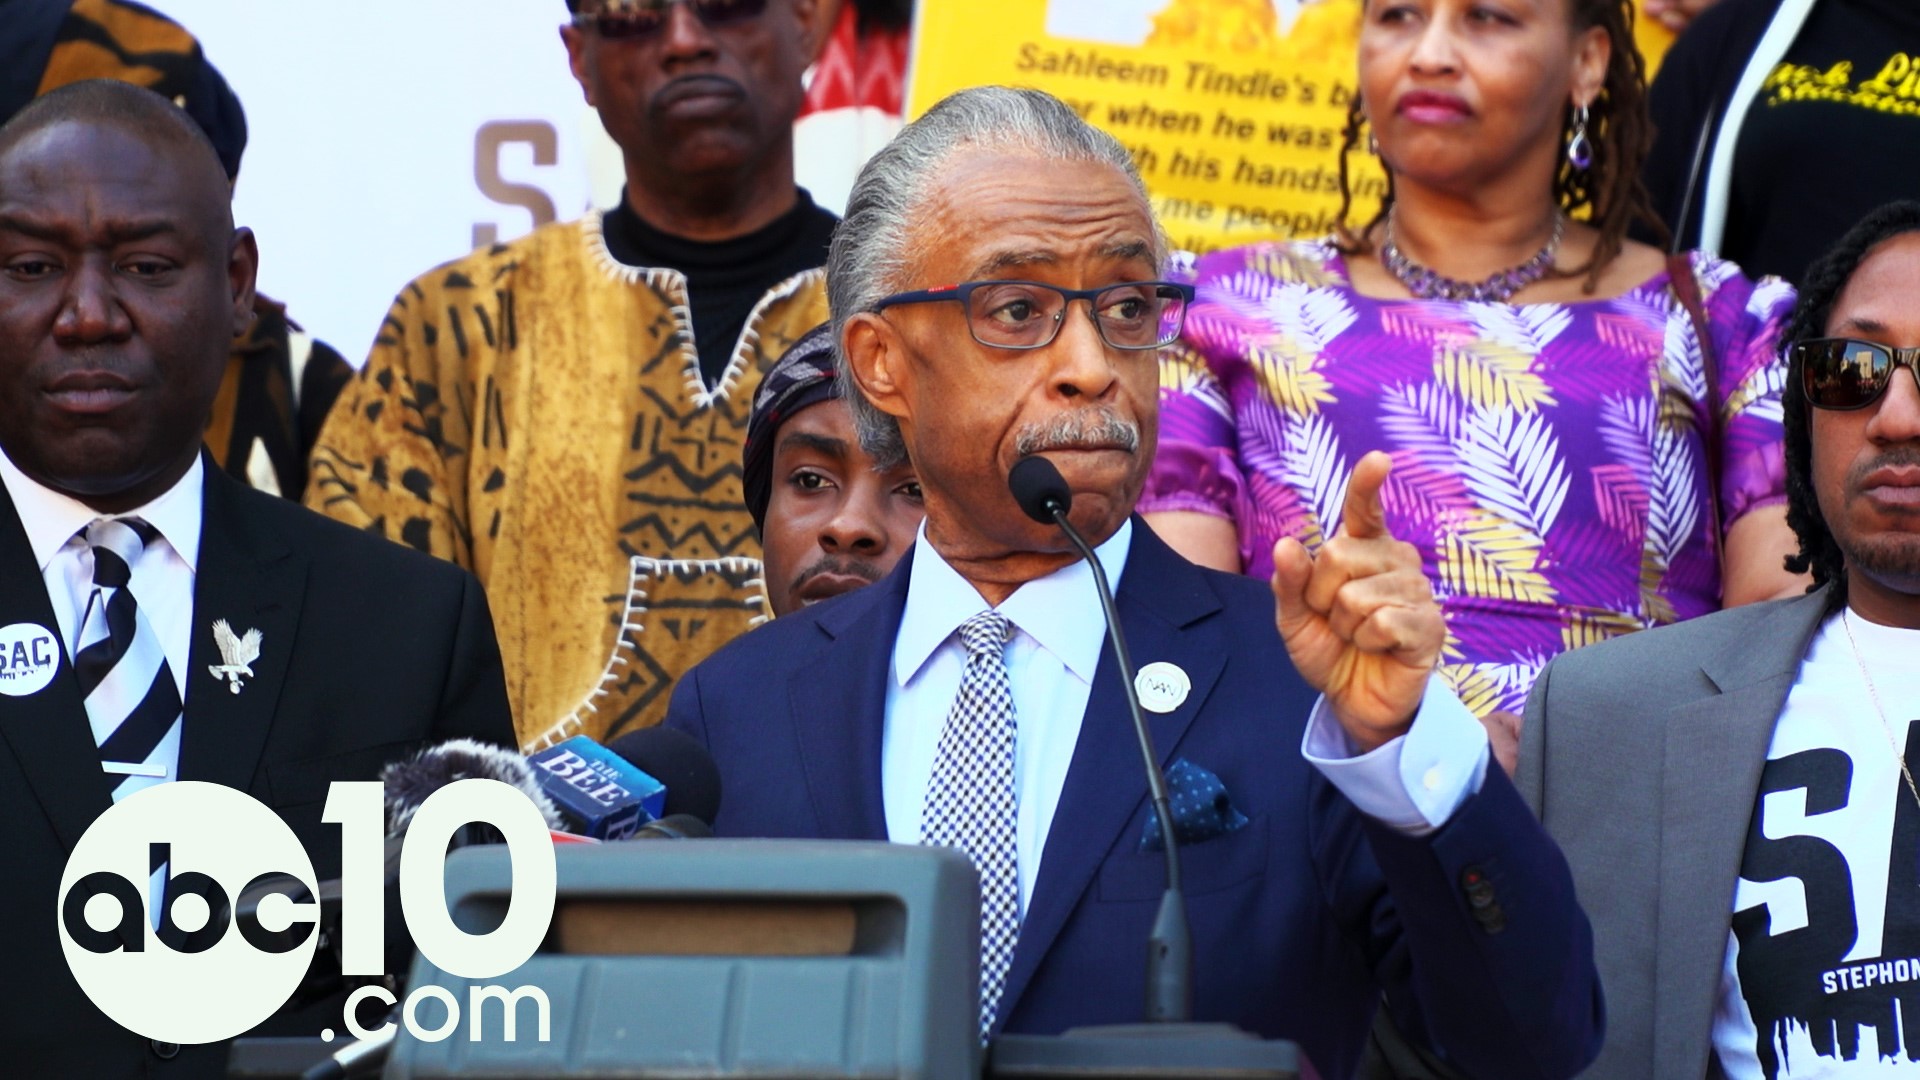 A year after the fatal shooting, Rev. Al Sharpton returns to Sacramento and blasts District Attorney Anne Marie Schubert's decision not to prosecute the officers who shot and killed Stephon Clark.